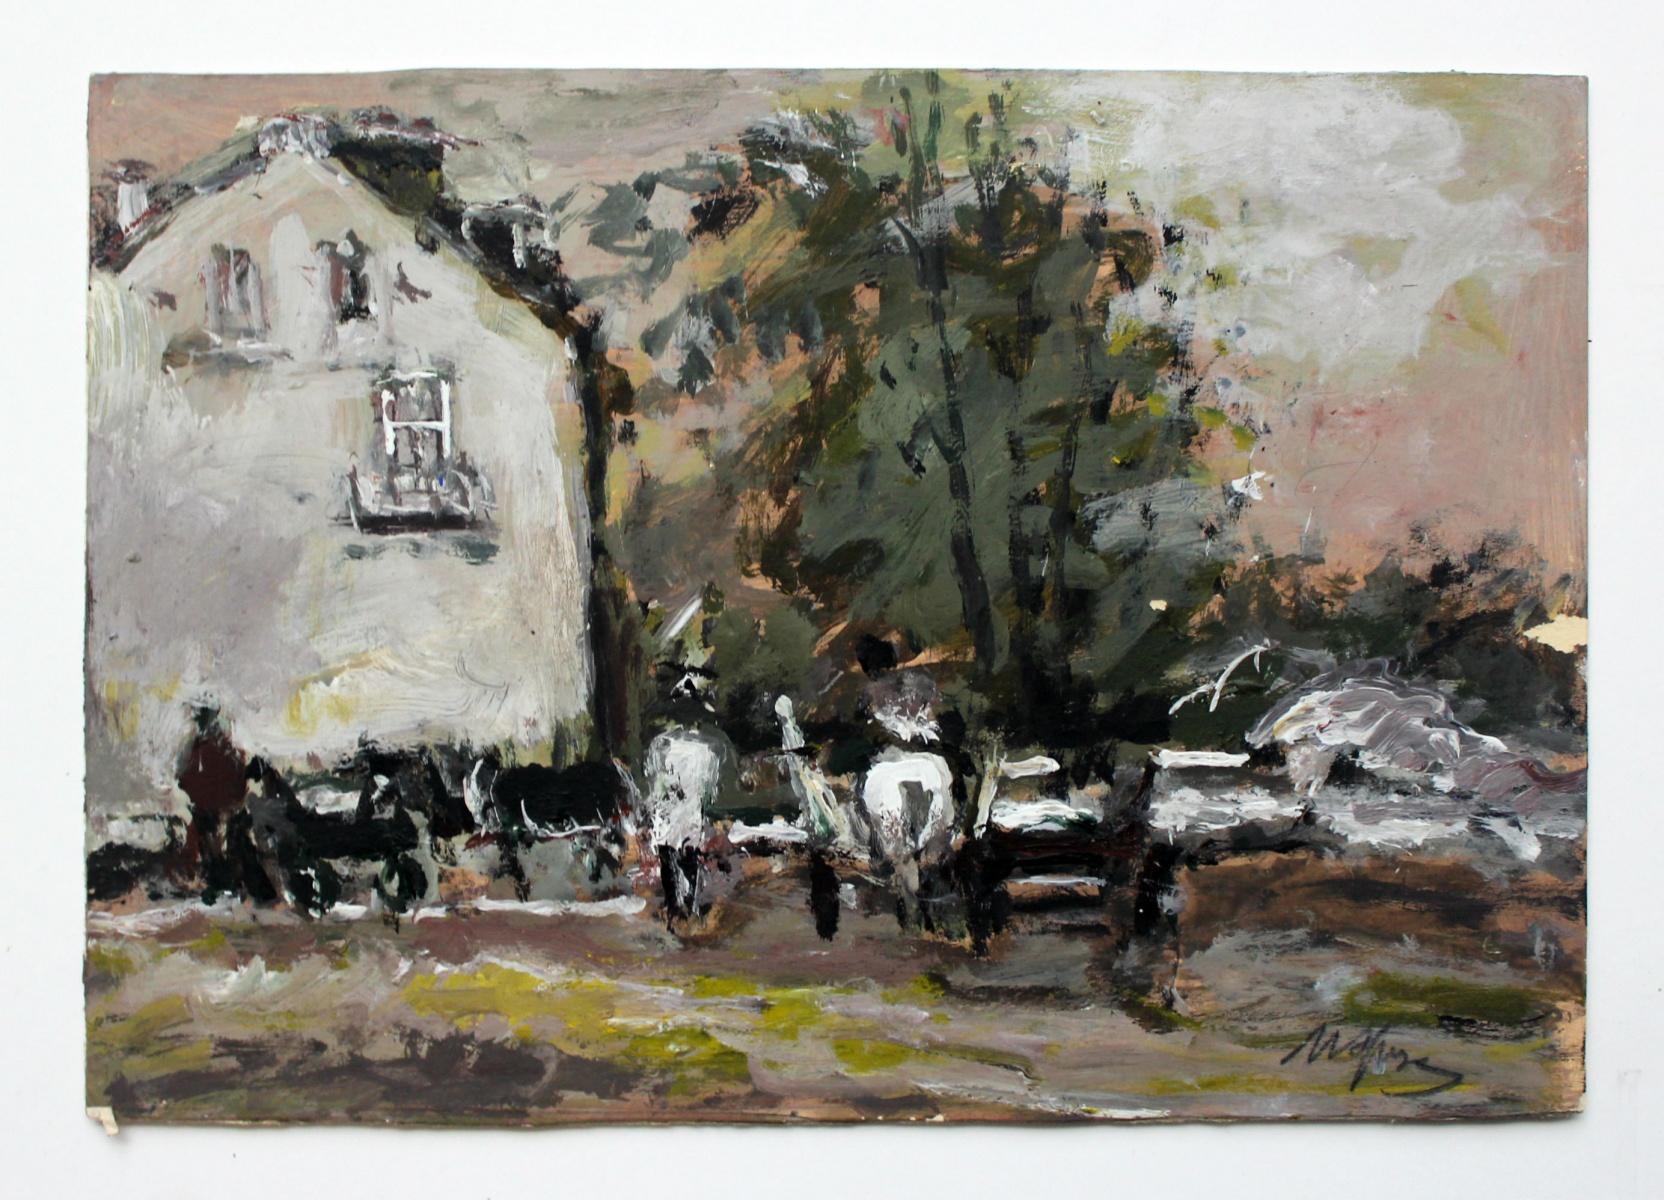 House - XXI century, Oil on cardboard, Figurative, Landscape - Painting by Magdalena Spasowicz